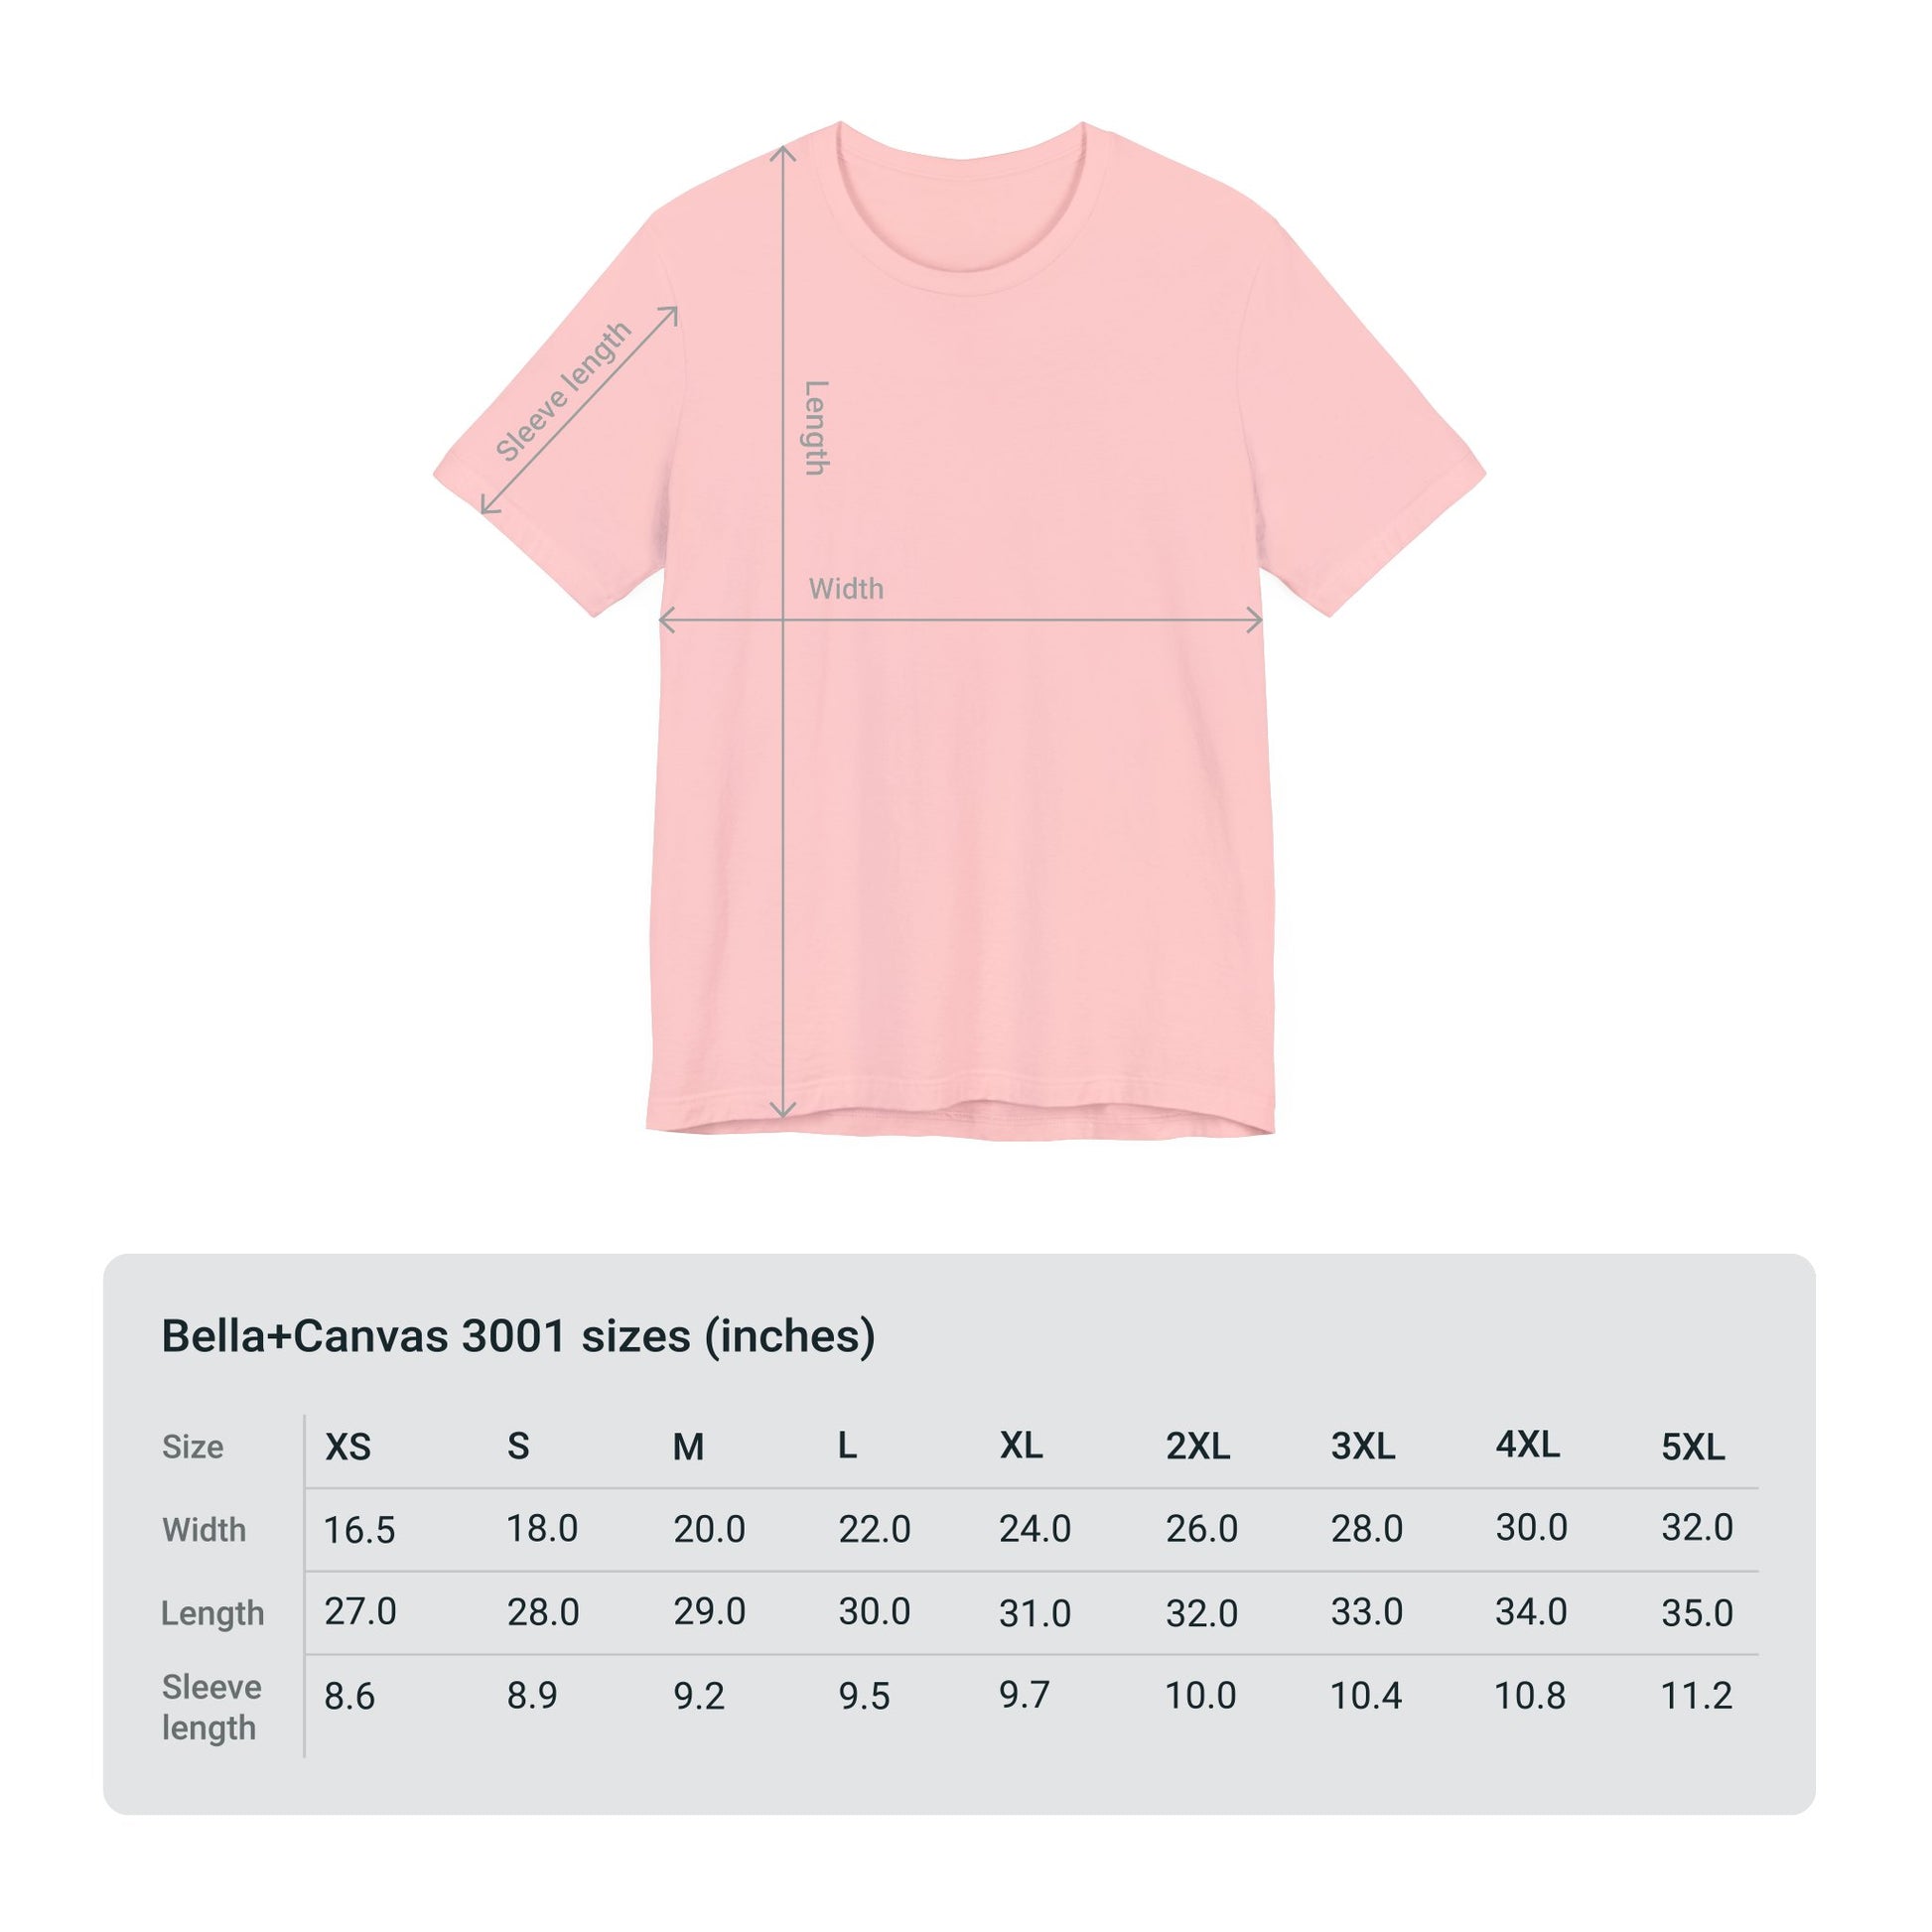 Flat front pink shirt with size chart